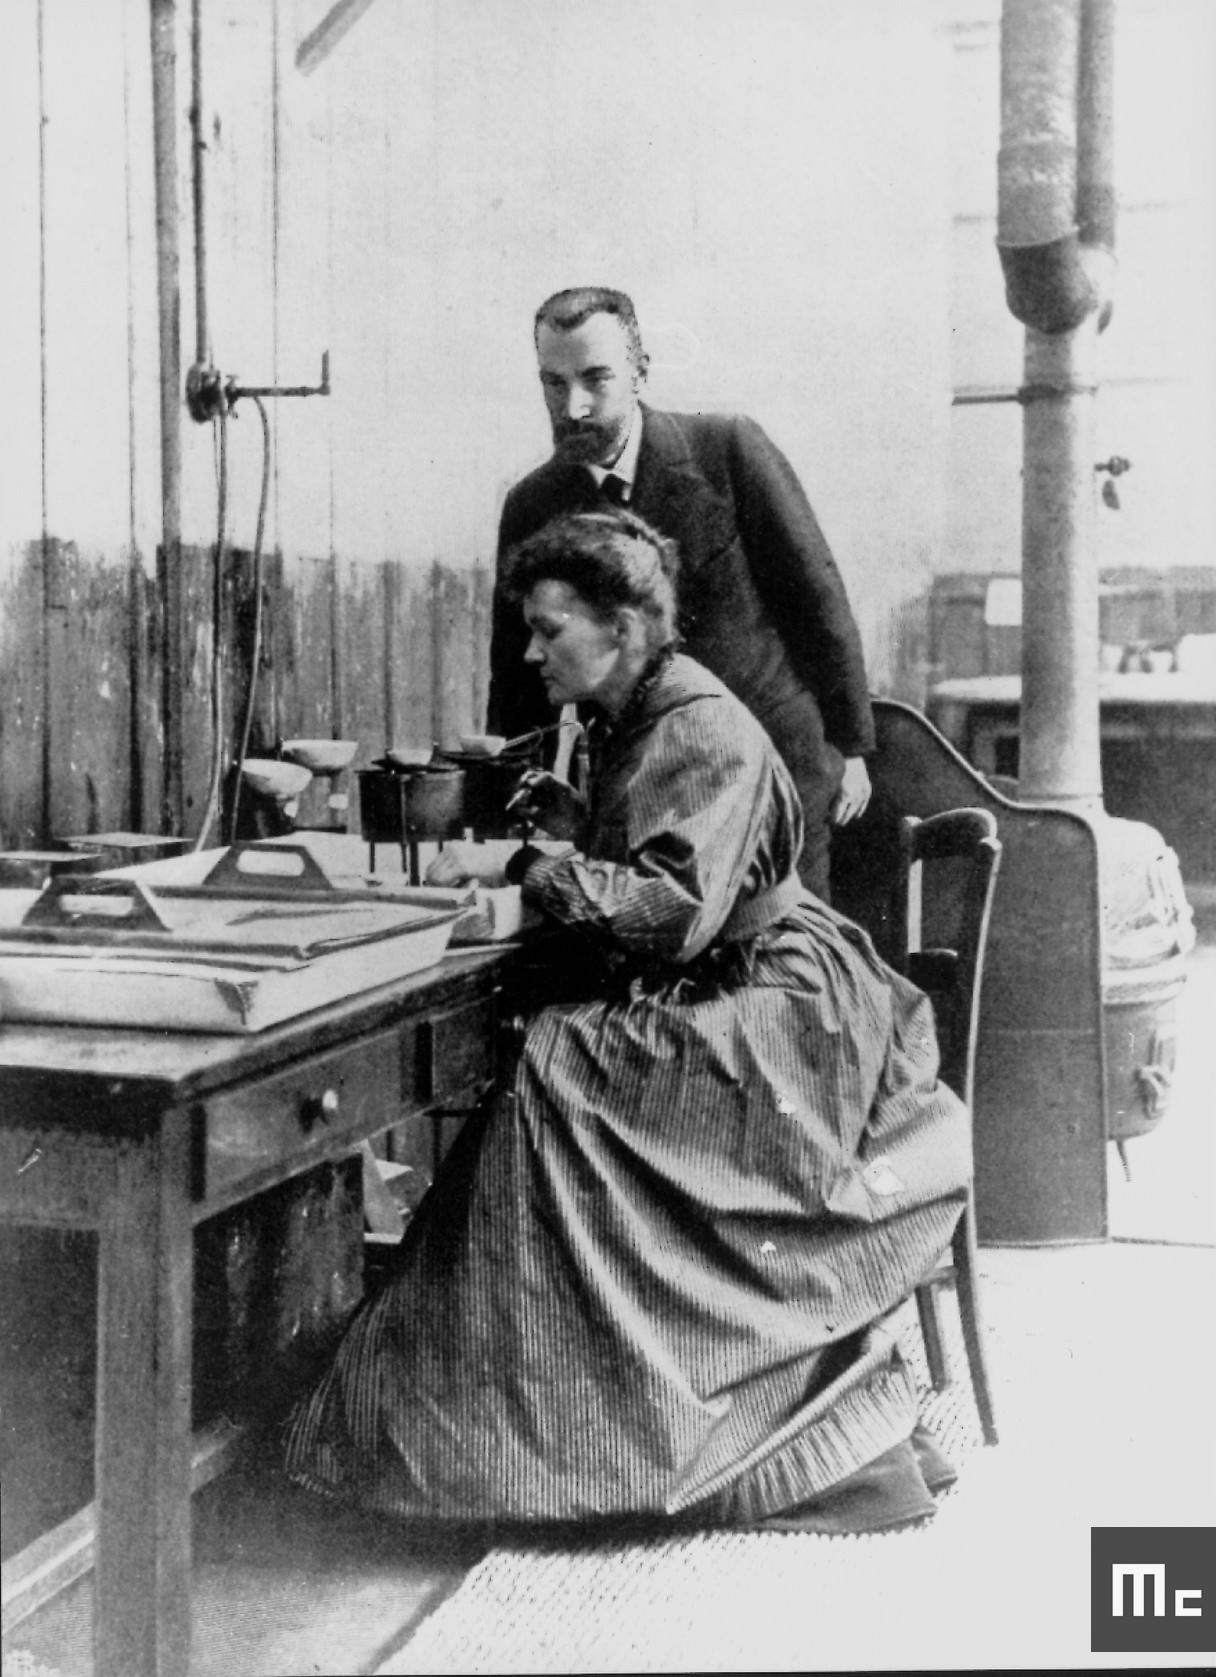 Marie Curie Radioactivity Discovery